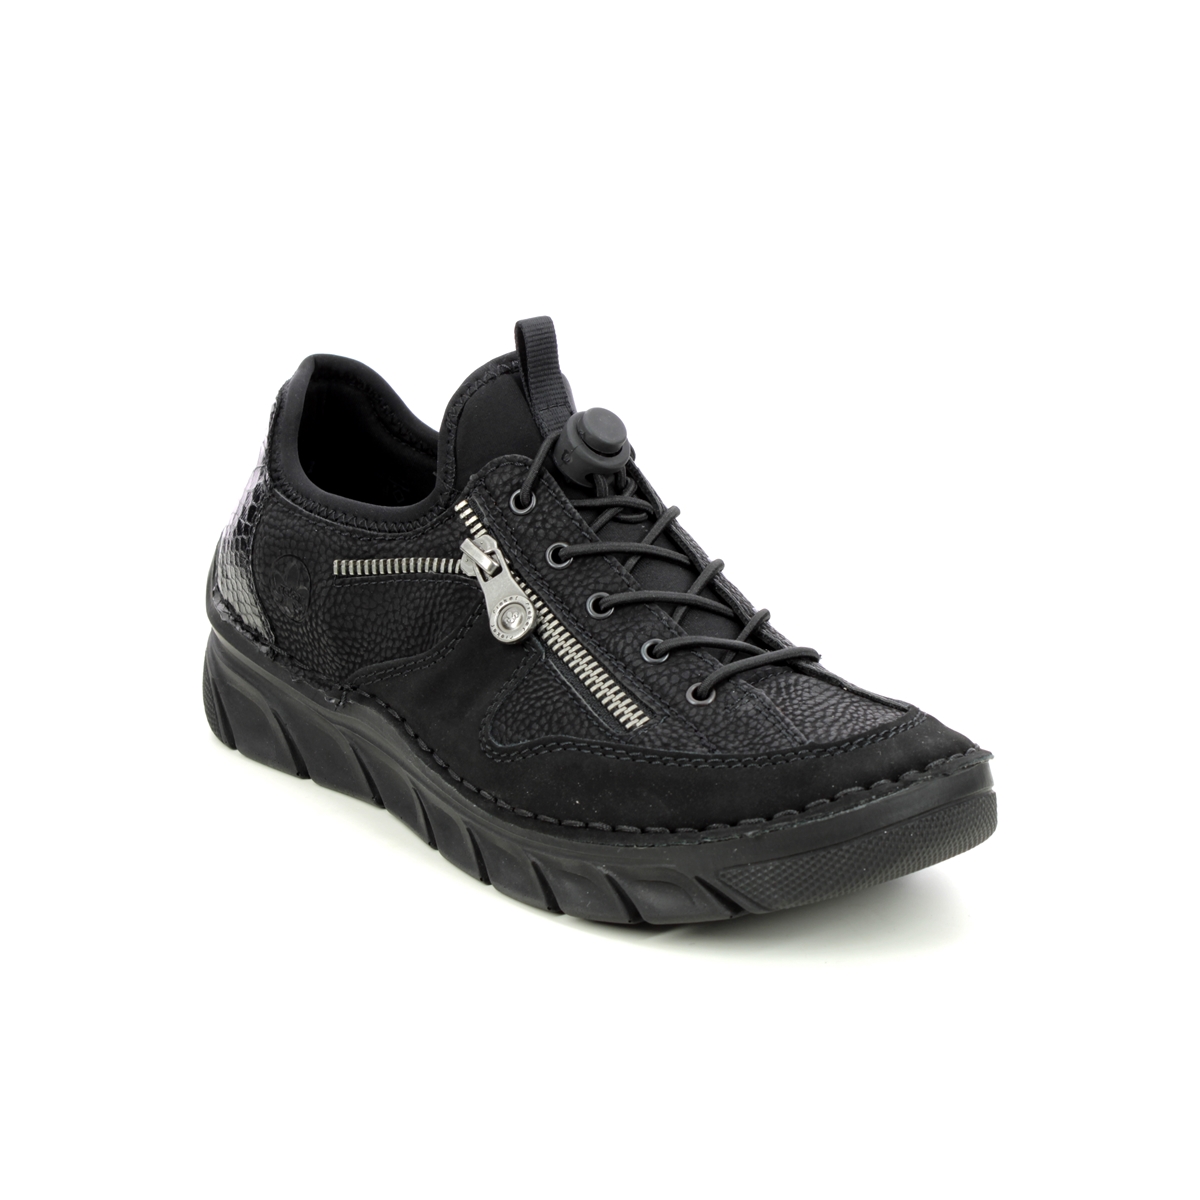 Rieker 55062-00 Black Womens trainers in a Plain Man-made in Size 37